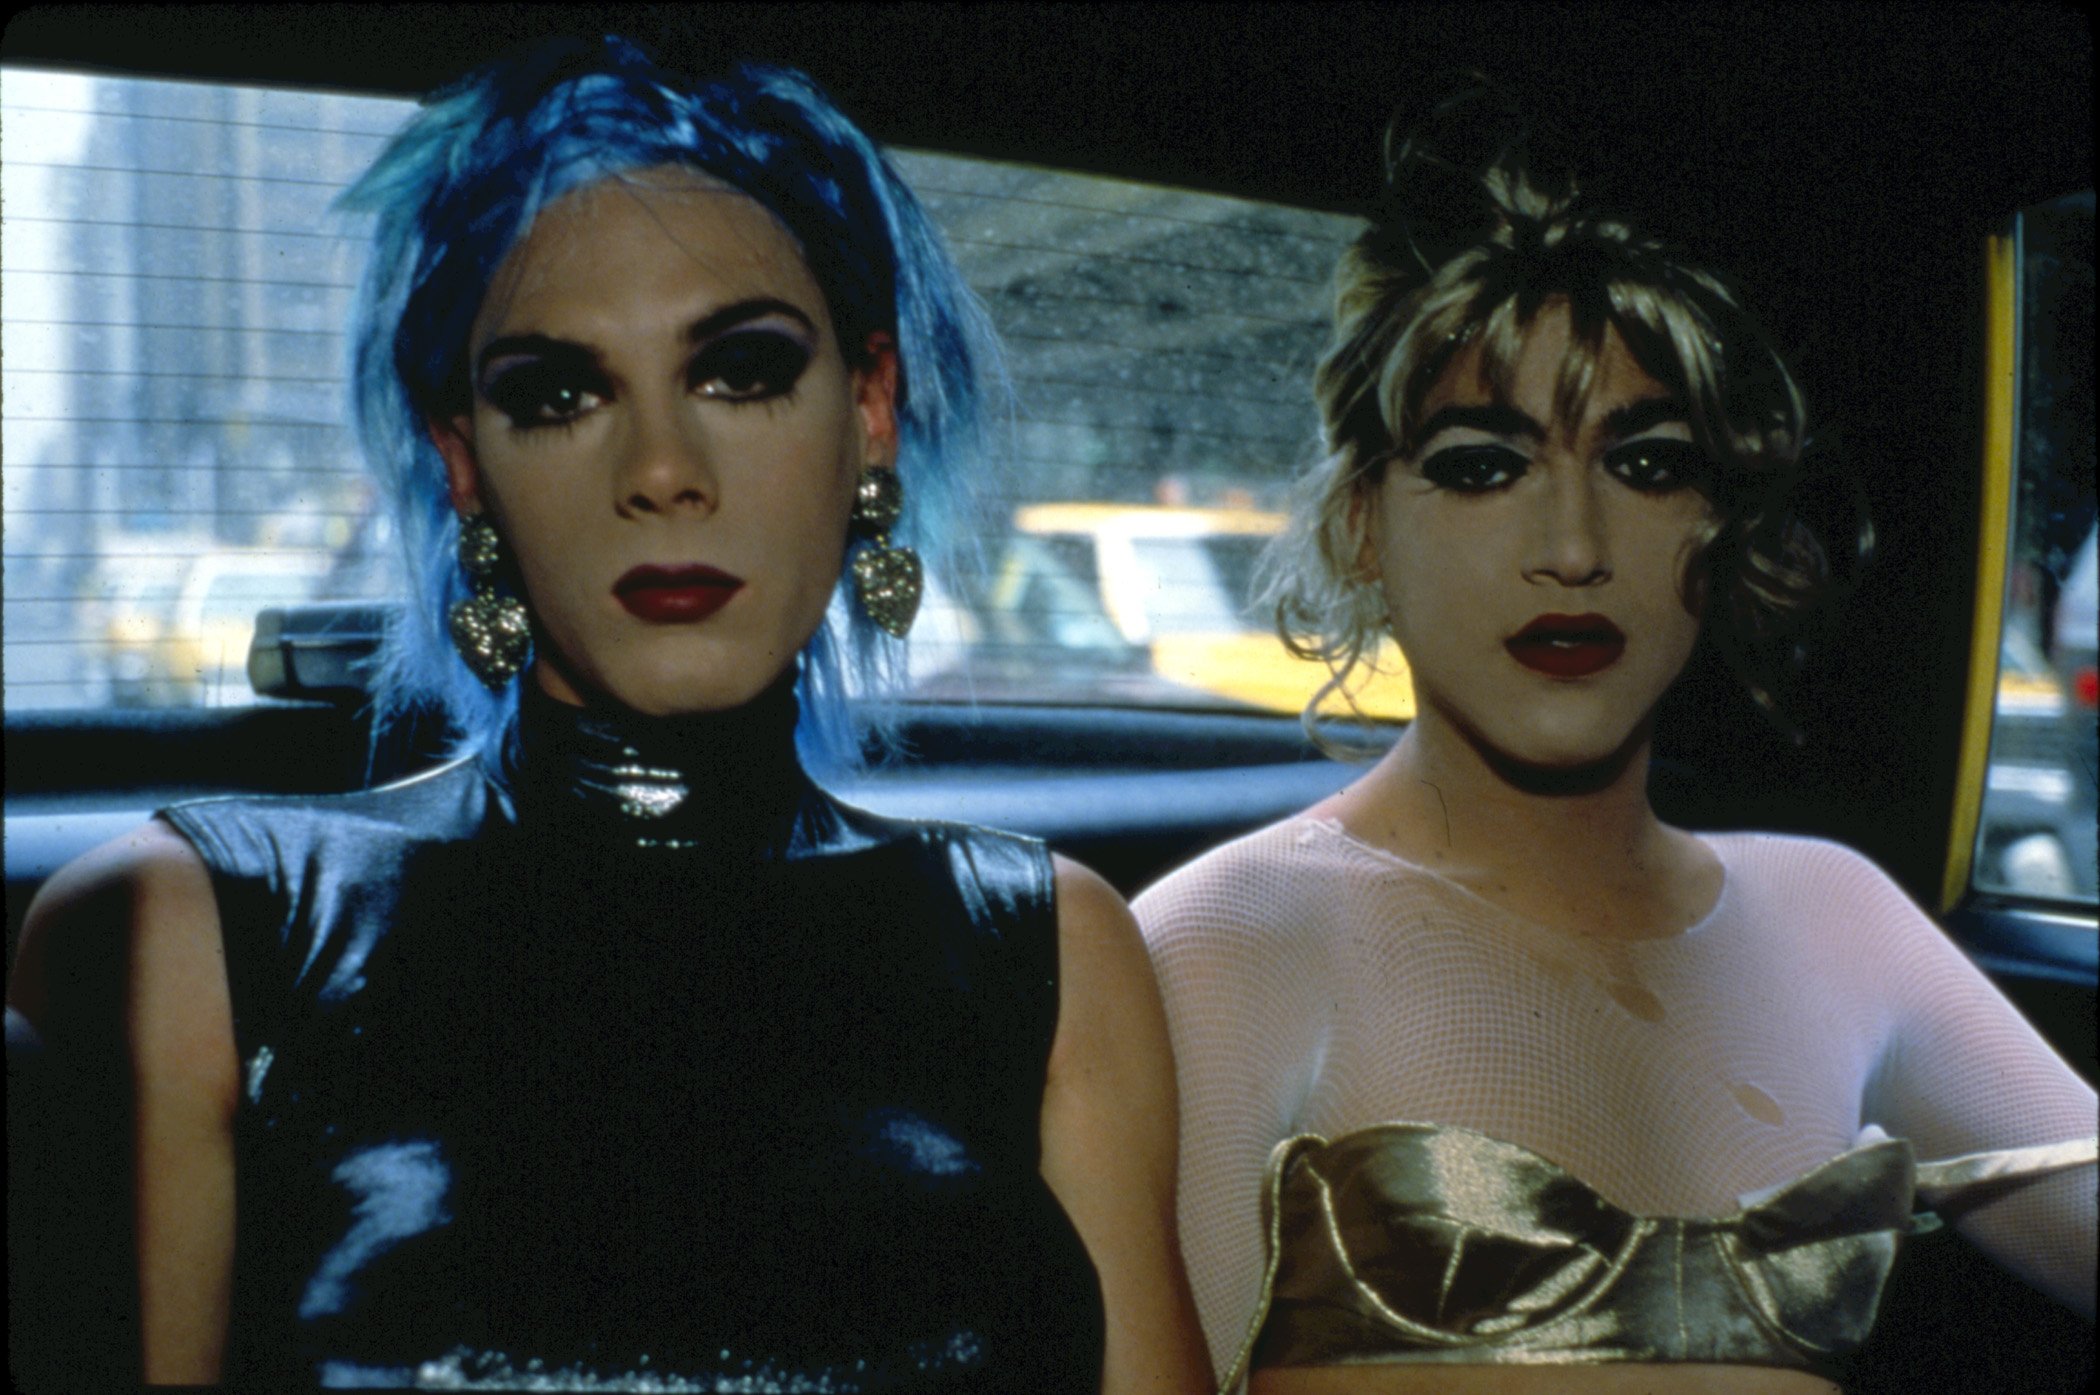 Nan Goldin, Misty and Jimmy Paulette in a Taxi, NYC, 1991, 30 x 40 inches